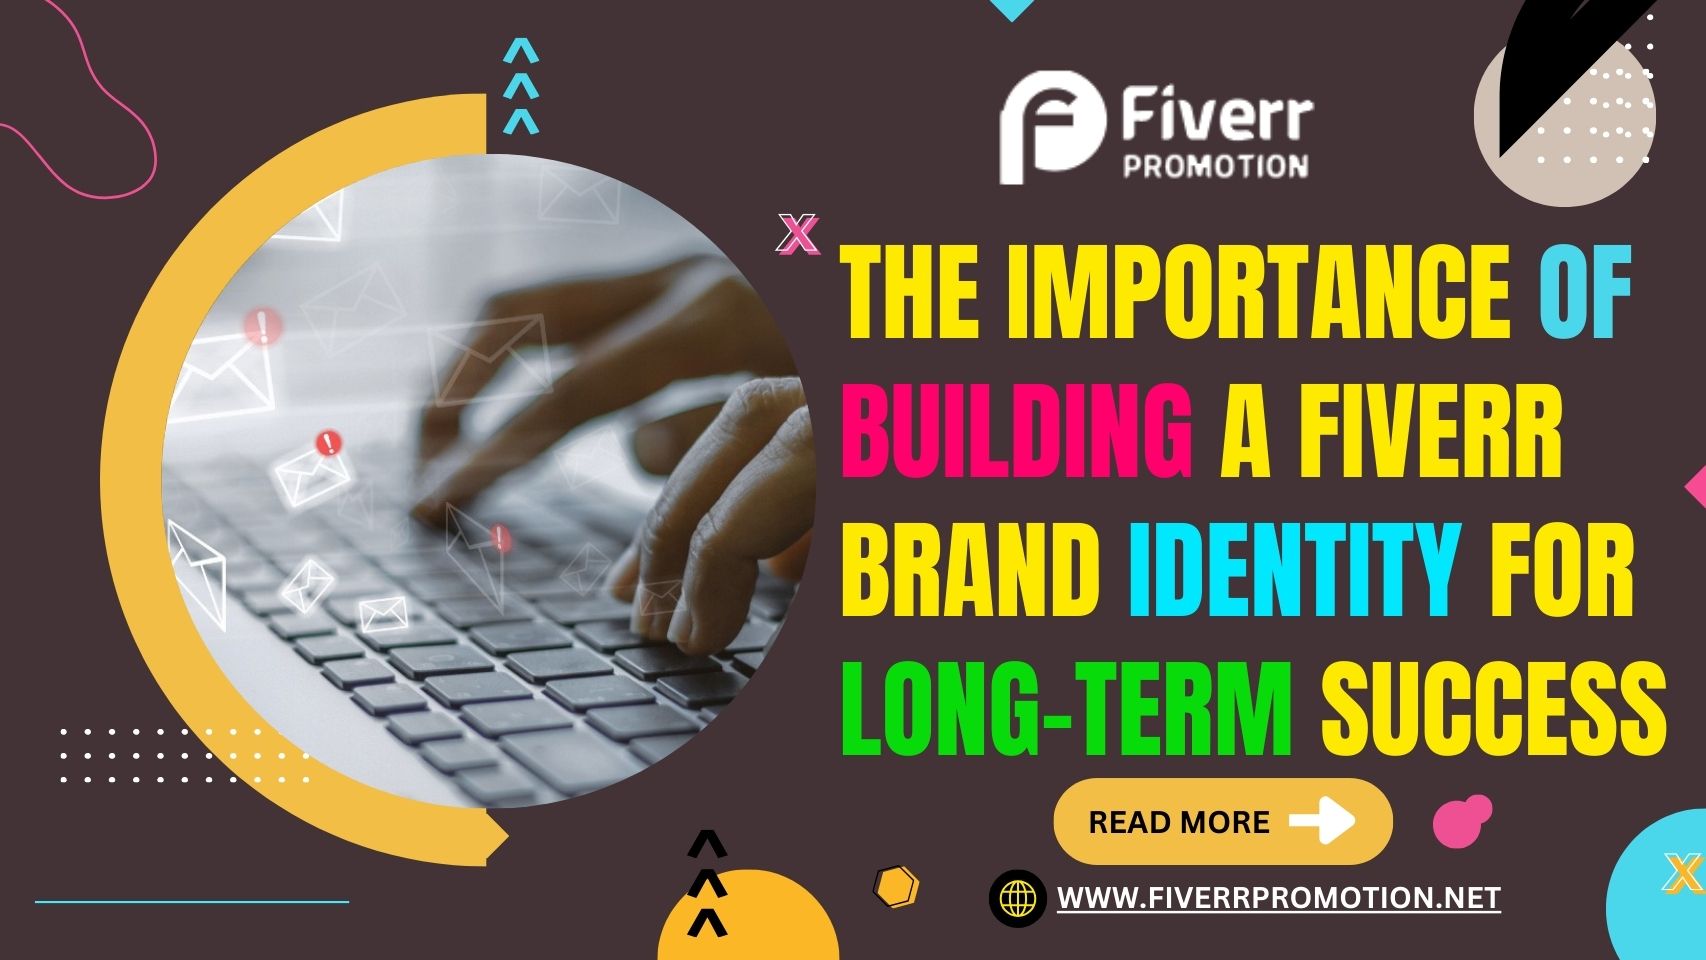 The Importance of Building a Fiverr Brand Identity for Long-Term Success